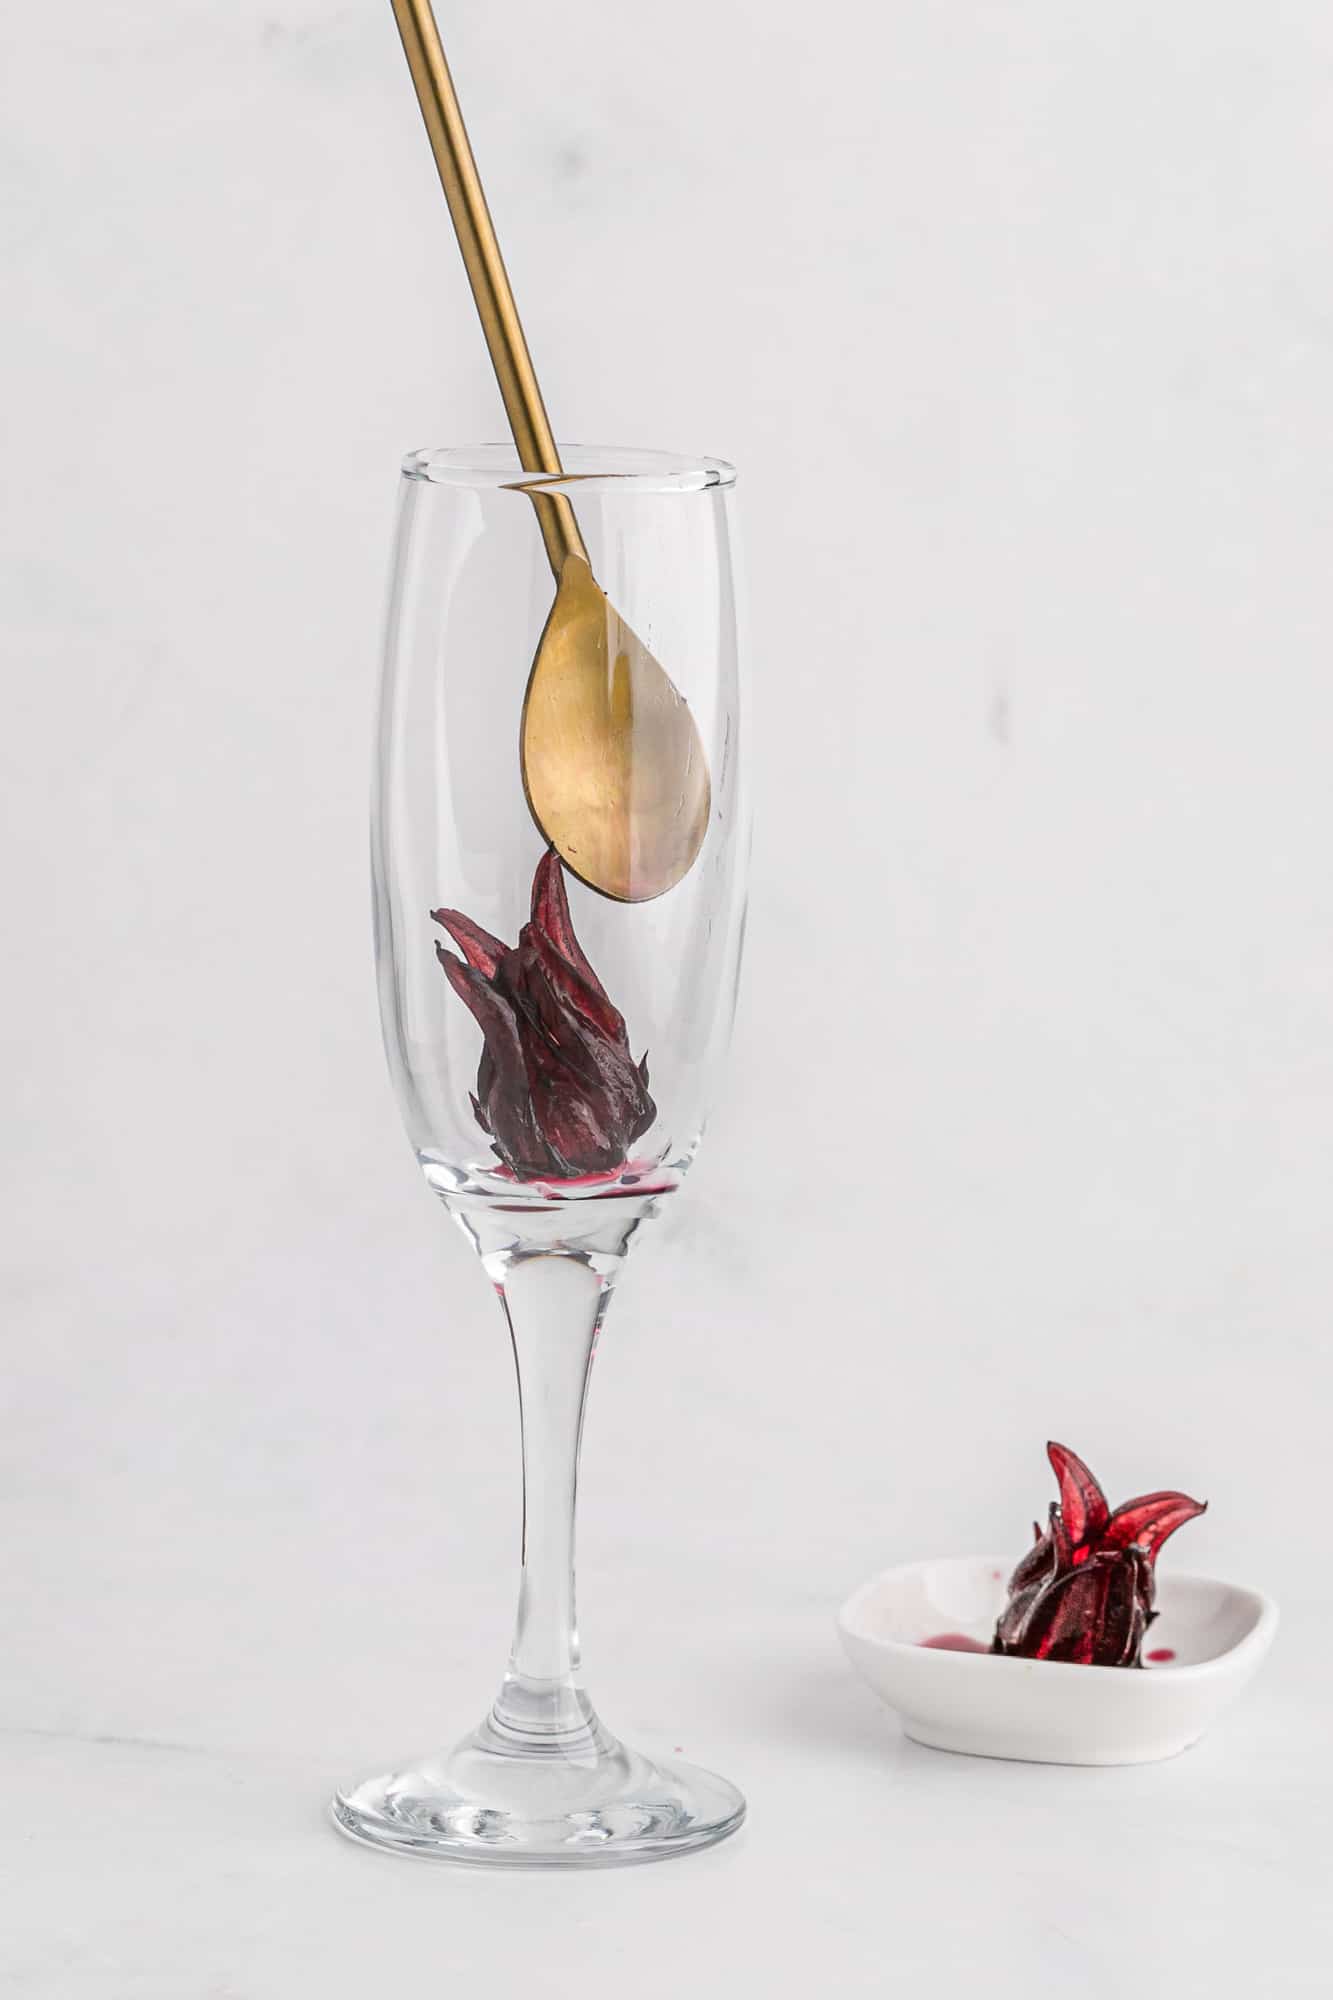 Hibiscus flower being placed in a champagne flute.